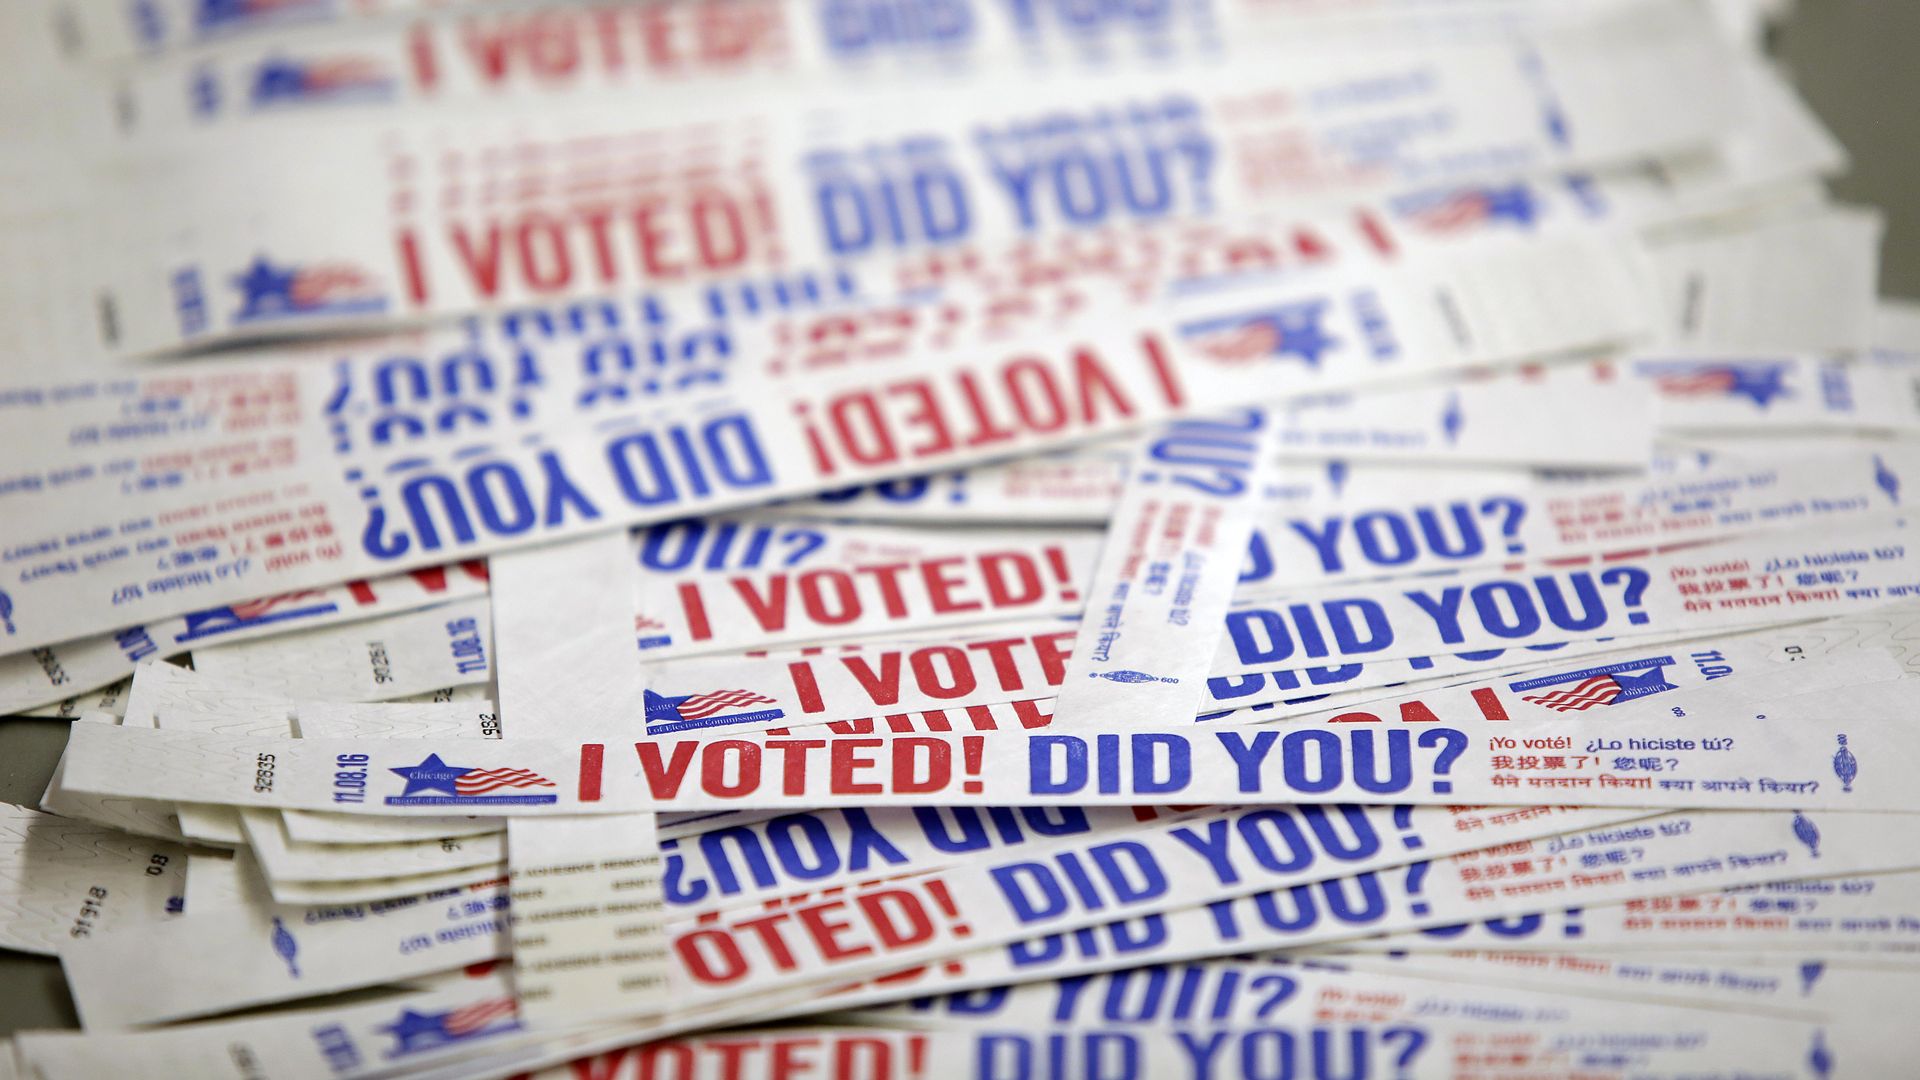 Stickers reading "I voted" in red and blue in a stack